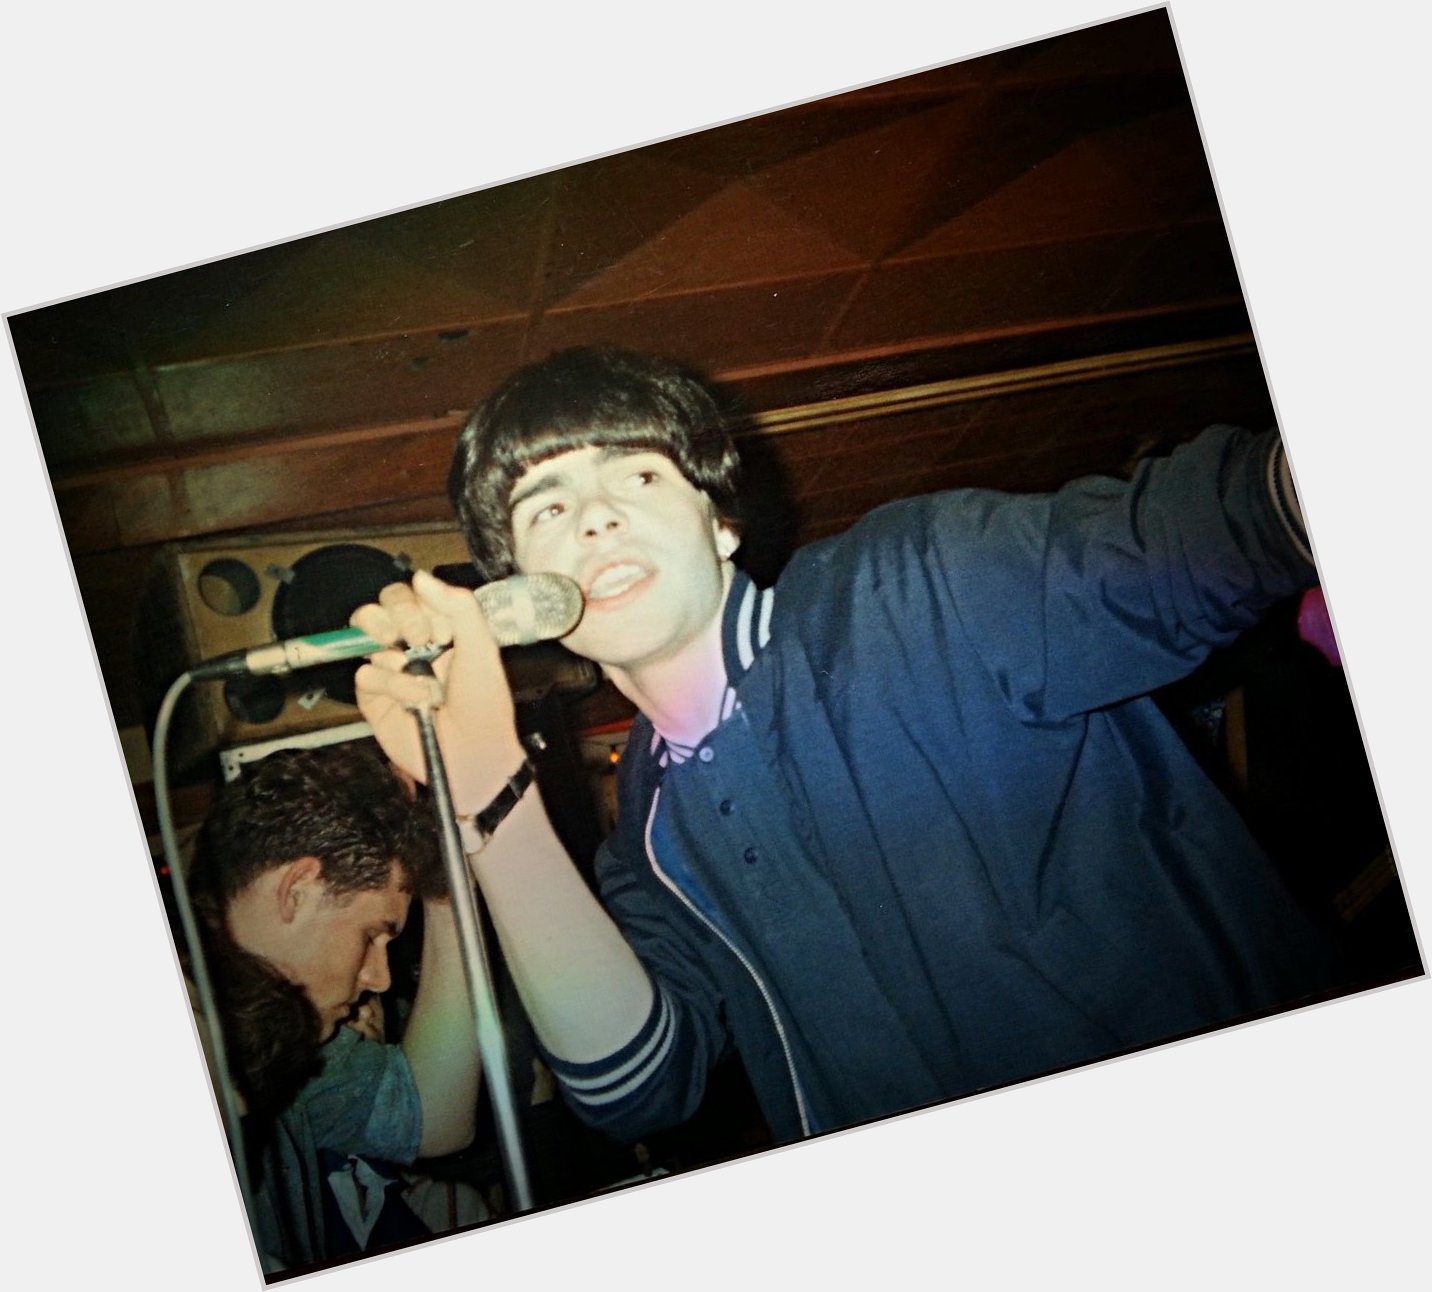 Happy birthday to one of my favorite frontmen, The Charlatans Tim Burgess! 